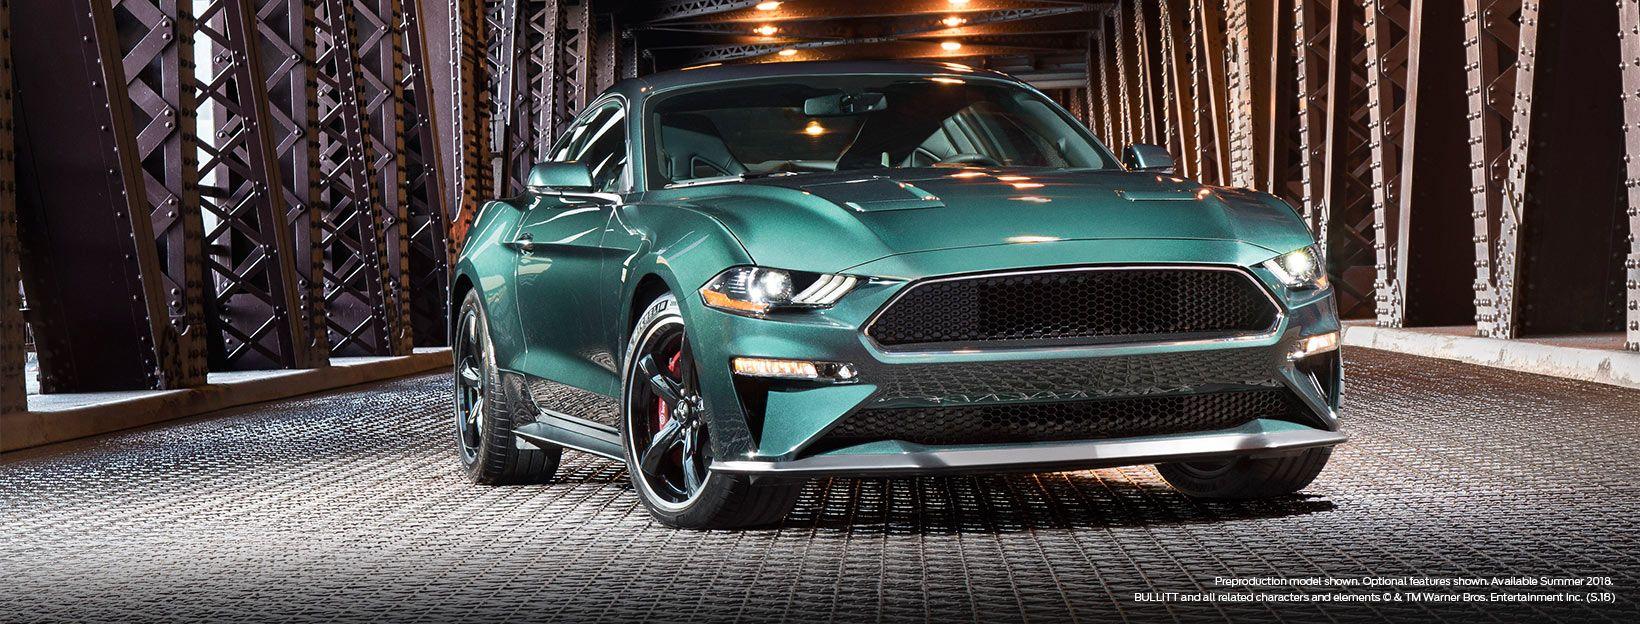 Introducing The Limited Edition 2019 Mustang BULLITT